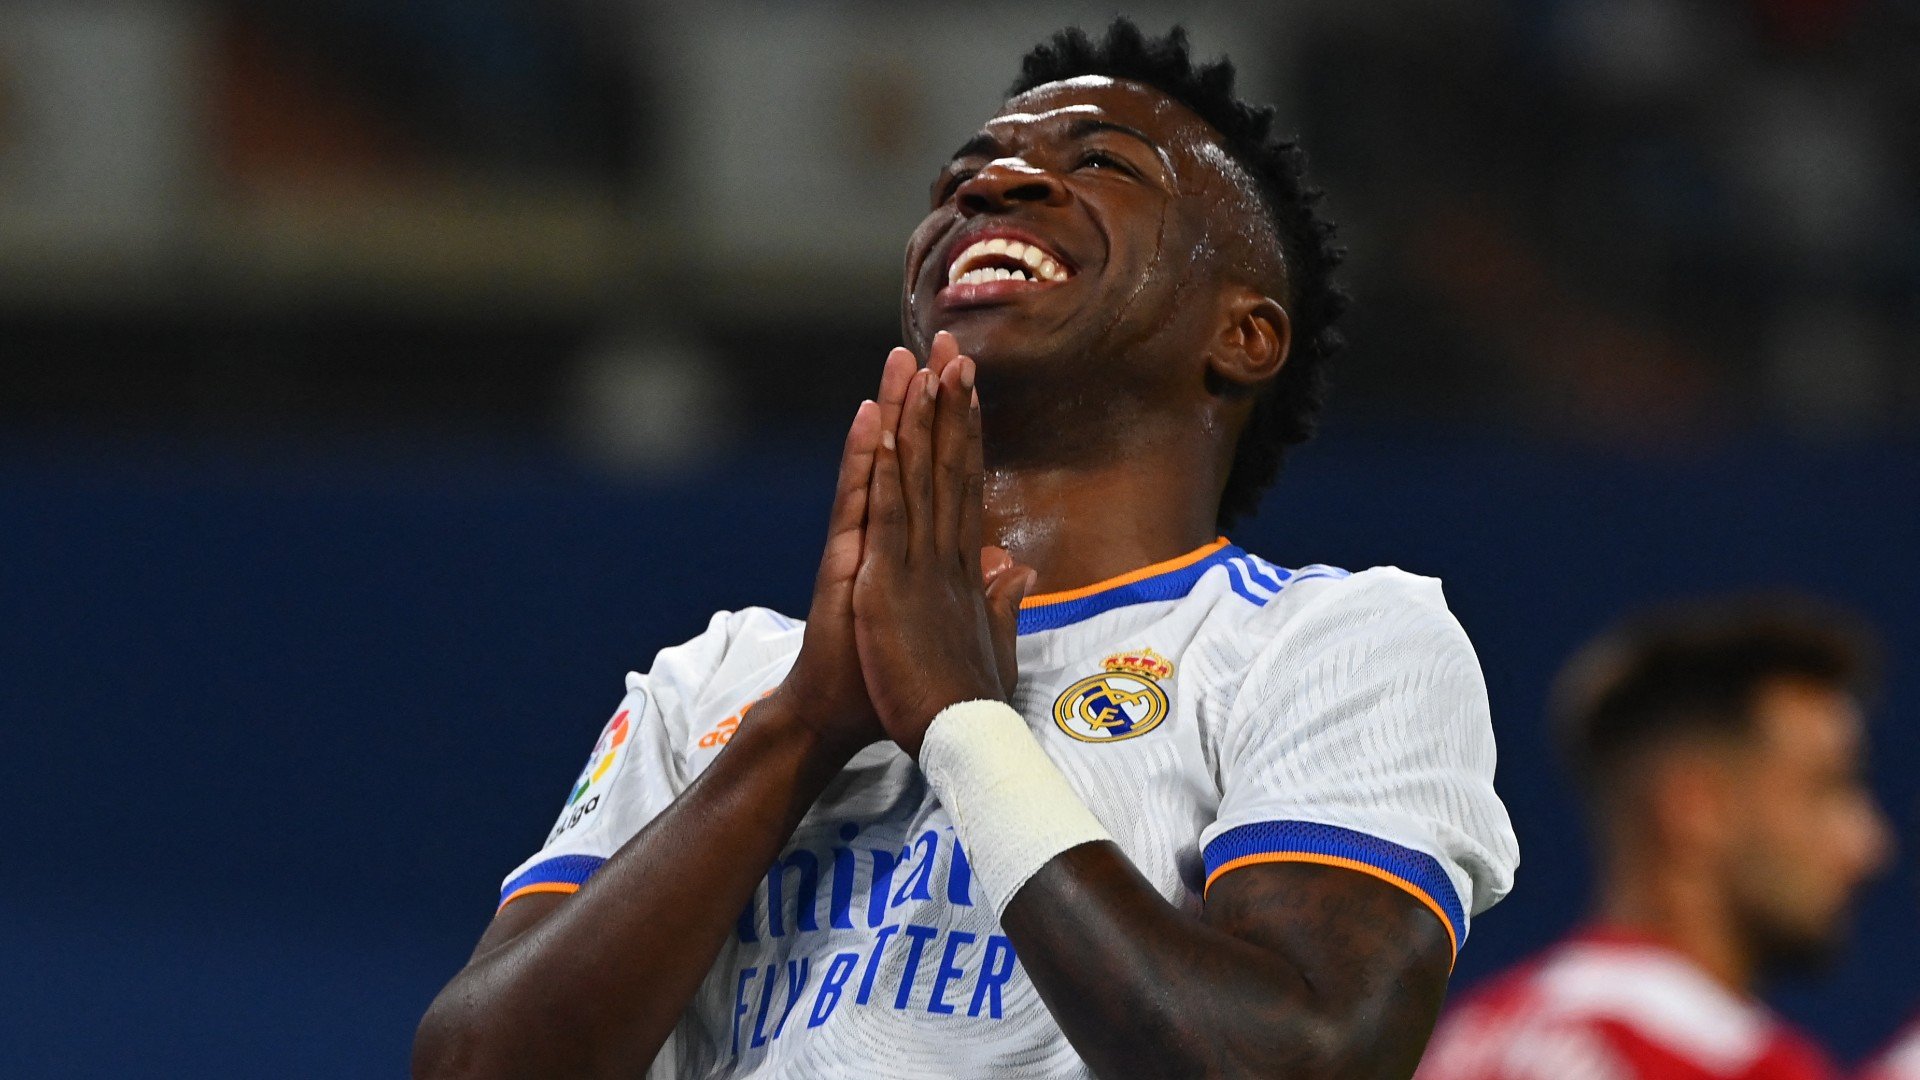 Vinicius Jr One Of The Lowest Paid Members Of Real Madrid's Squad And No New Contract Talks Yet. Sporting News Canada